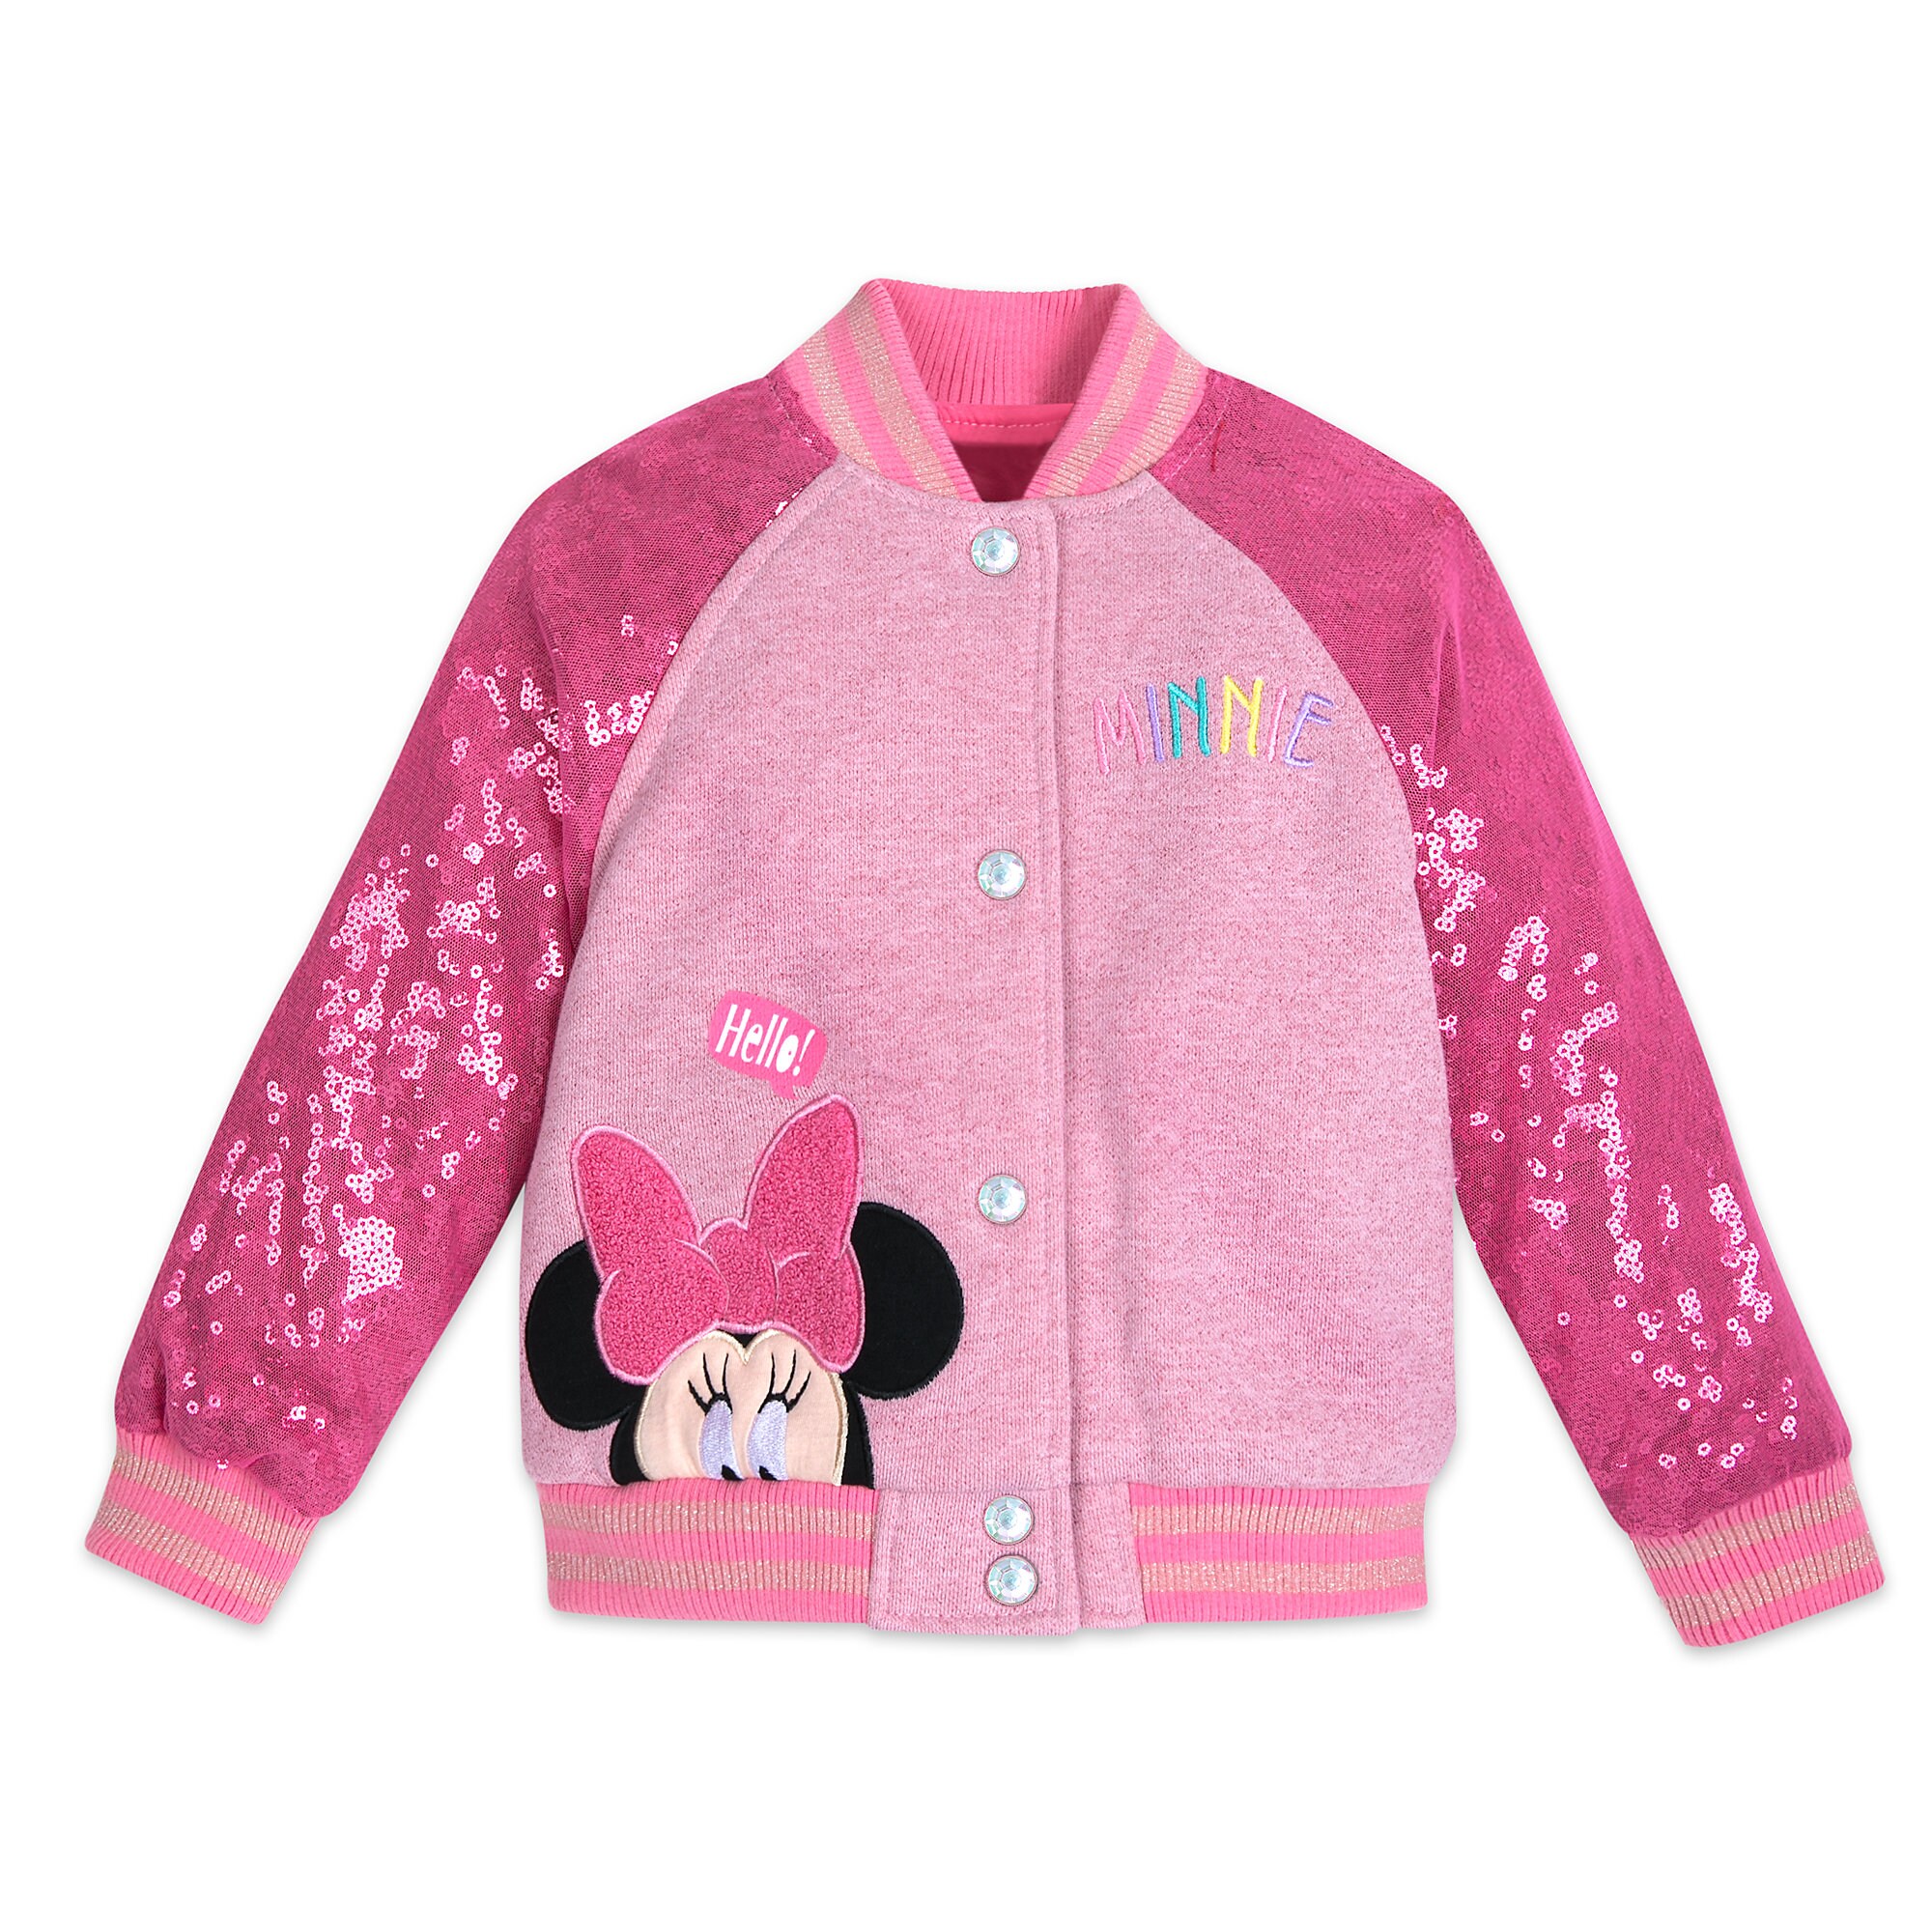 Minnie Mouse Pink Sequin Varsity Jacket - Personalized